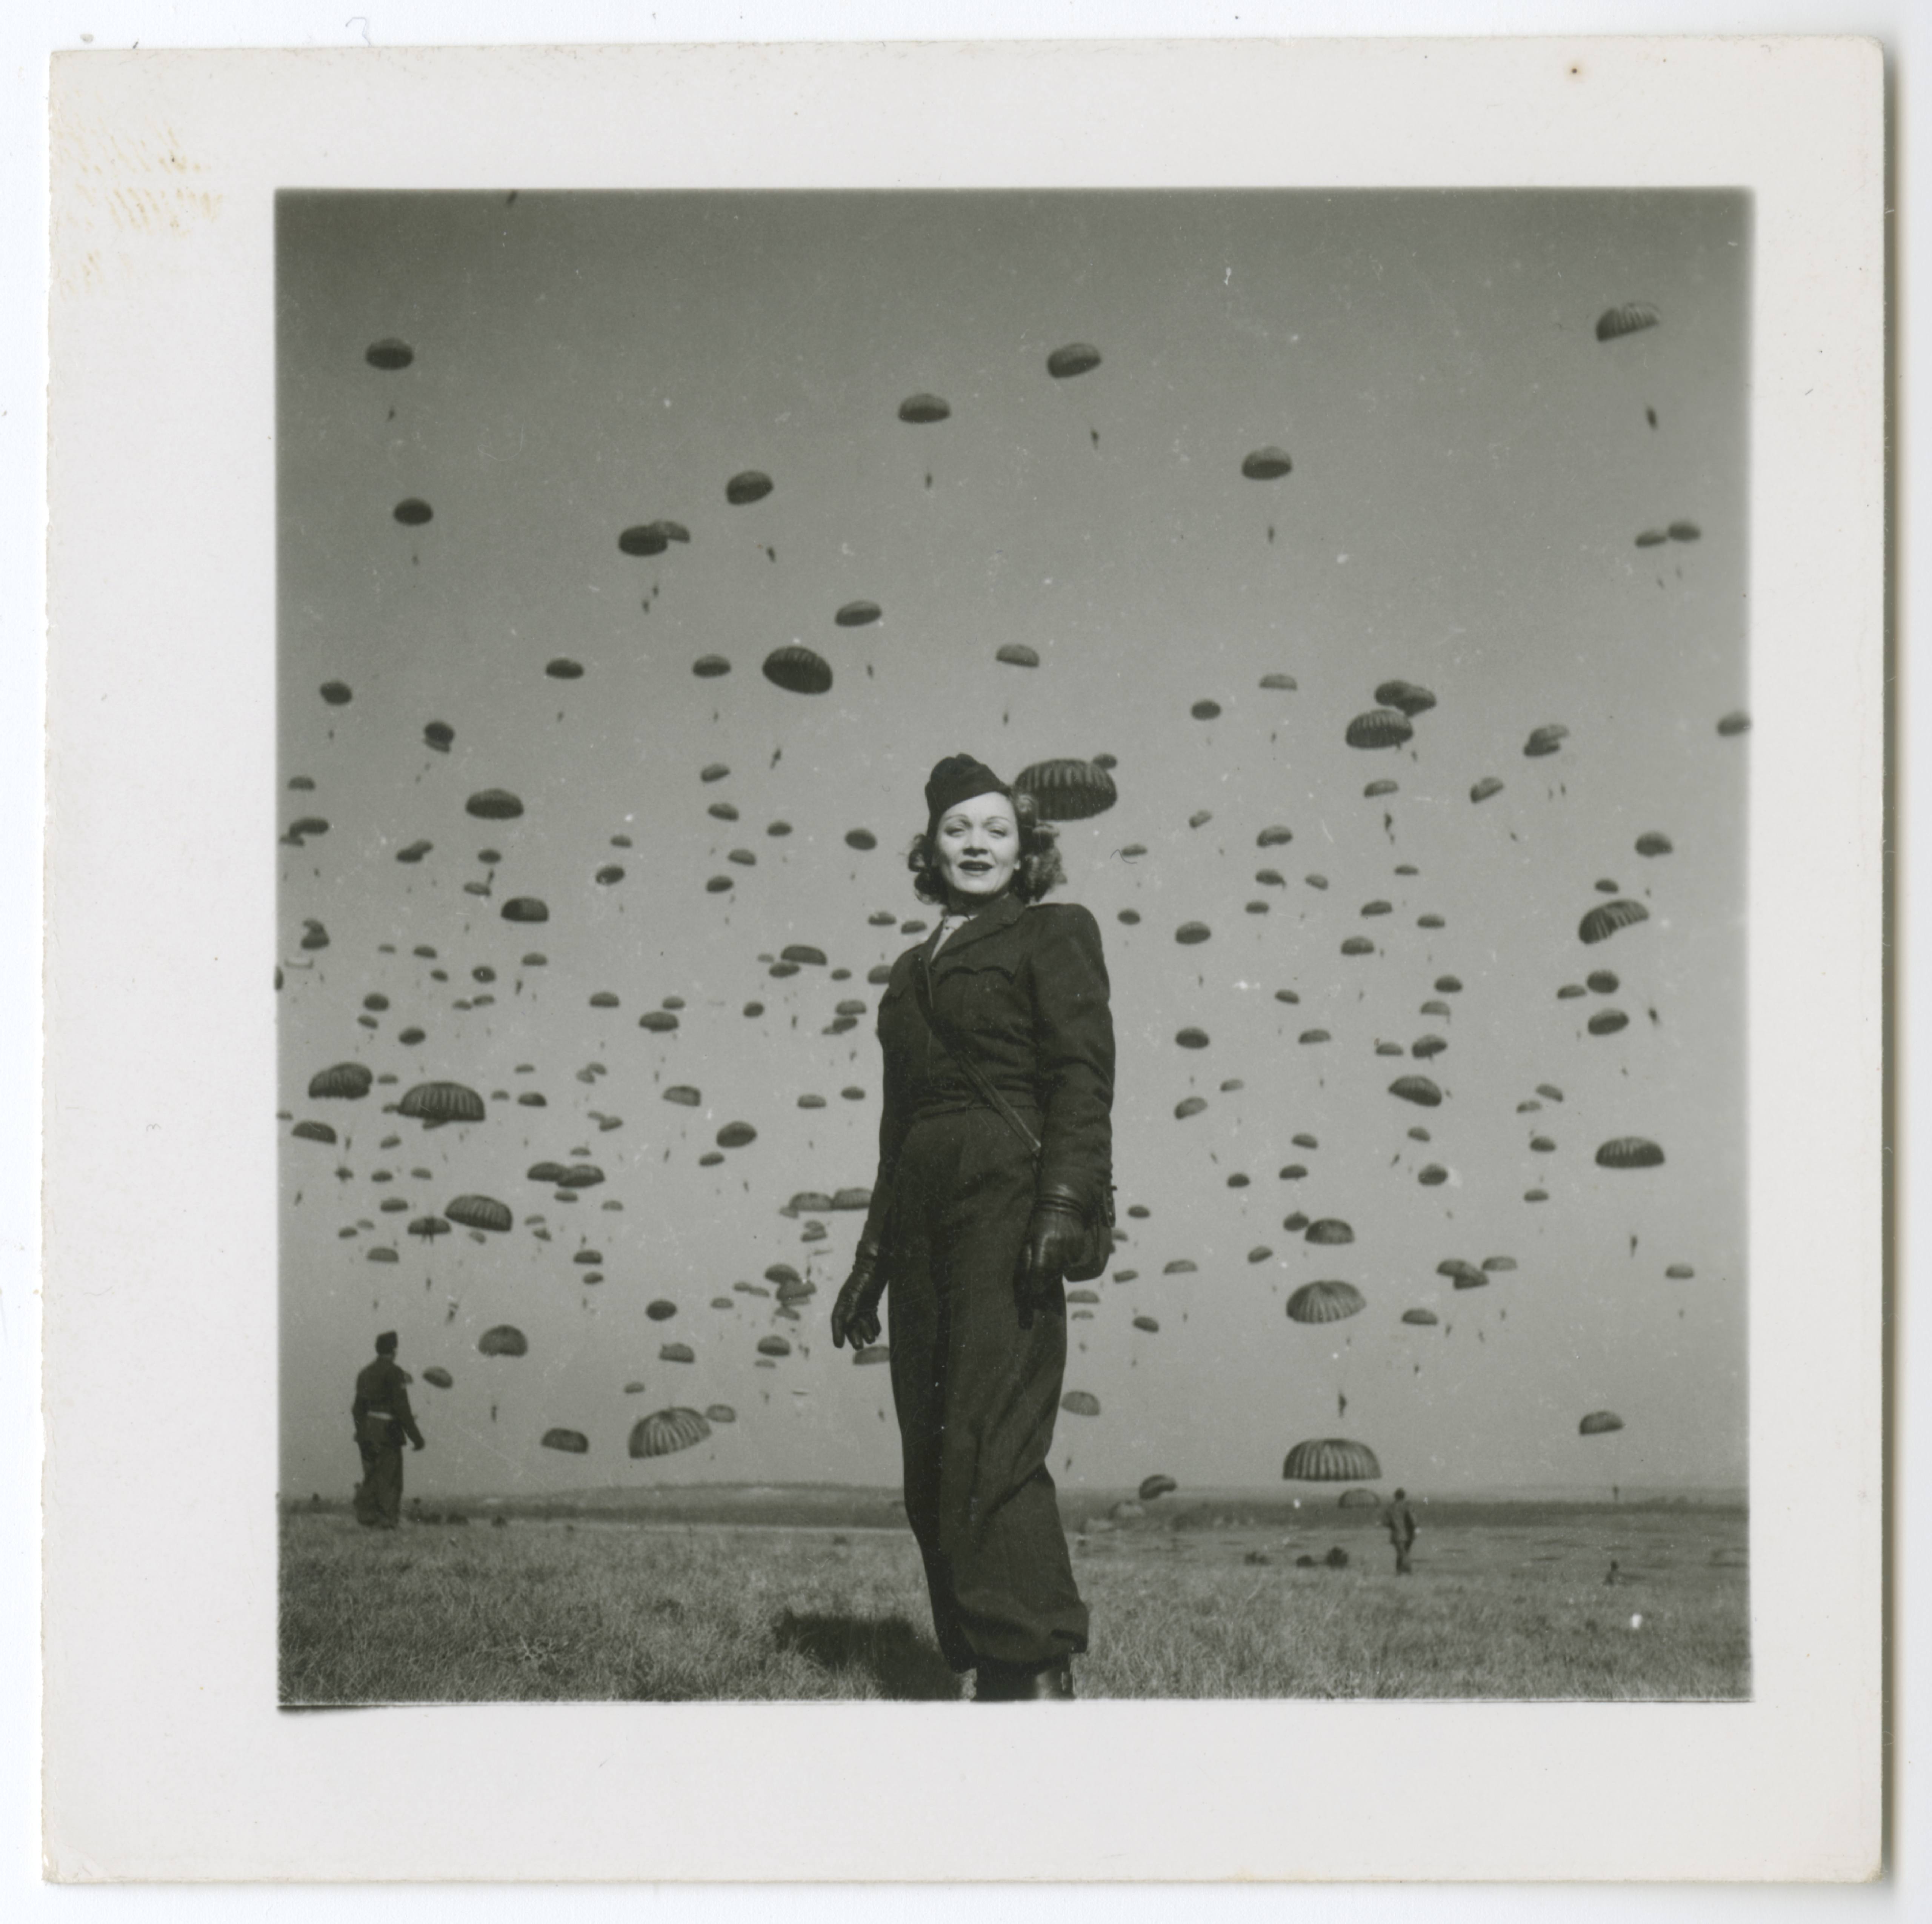 Marlene Dietrich on a paratrooper practice jump with the 82nd Airborne Division, Soissons in northern France, 13 March 1945